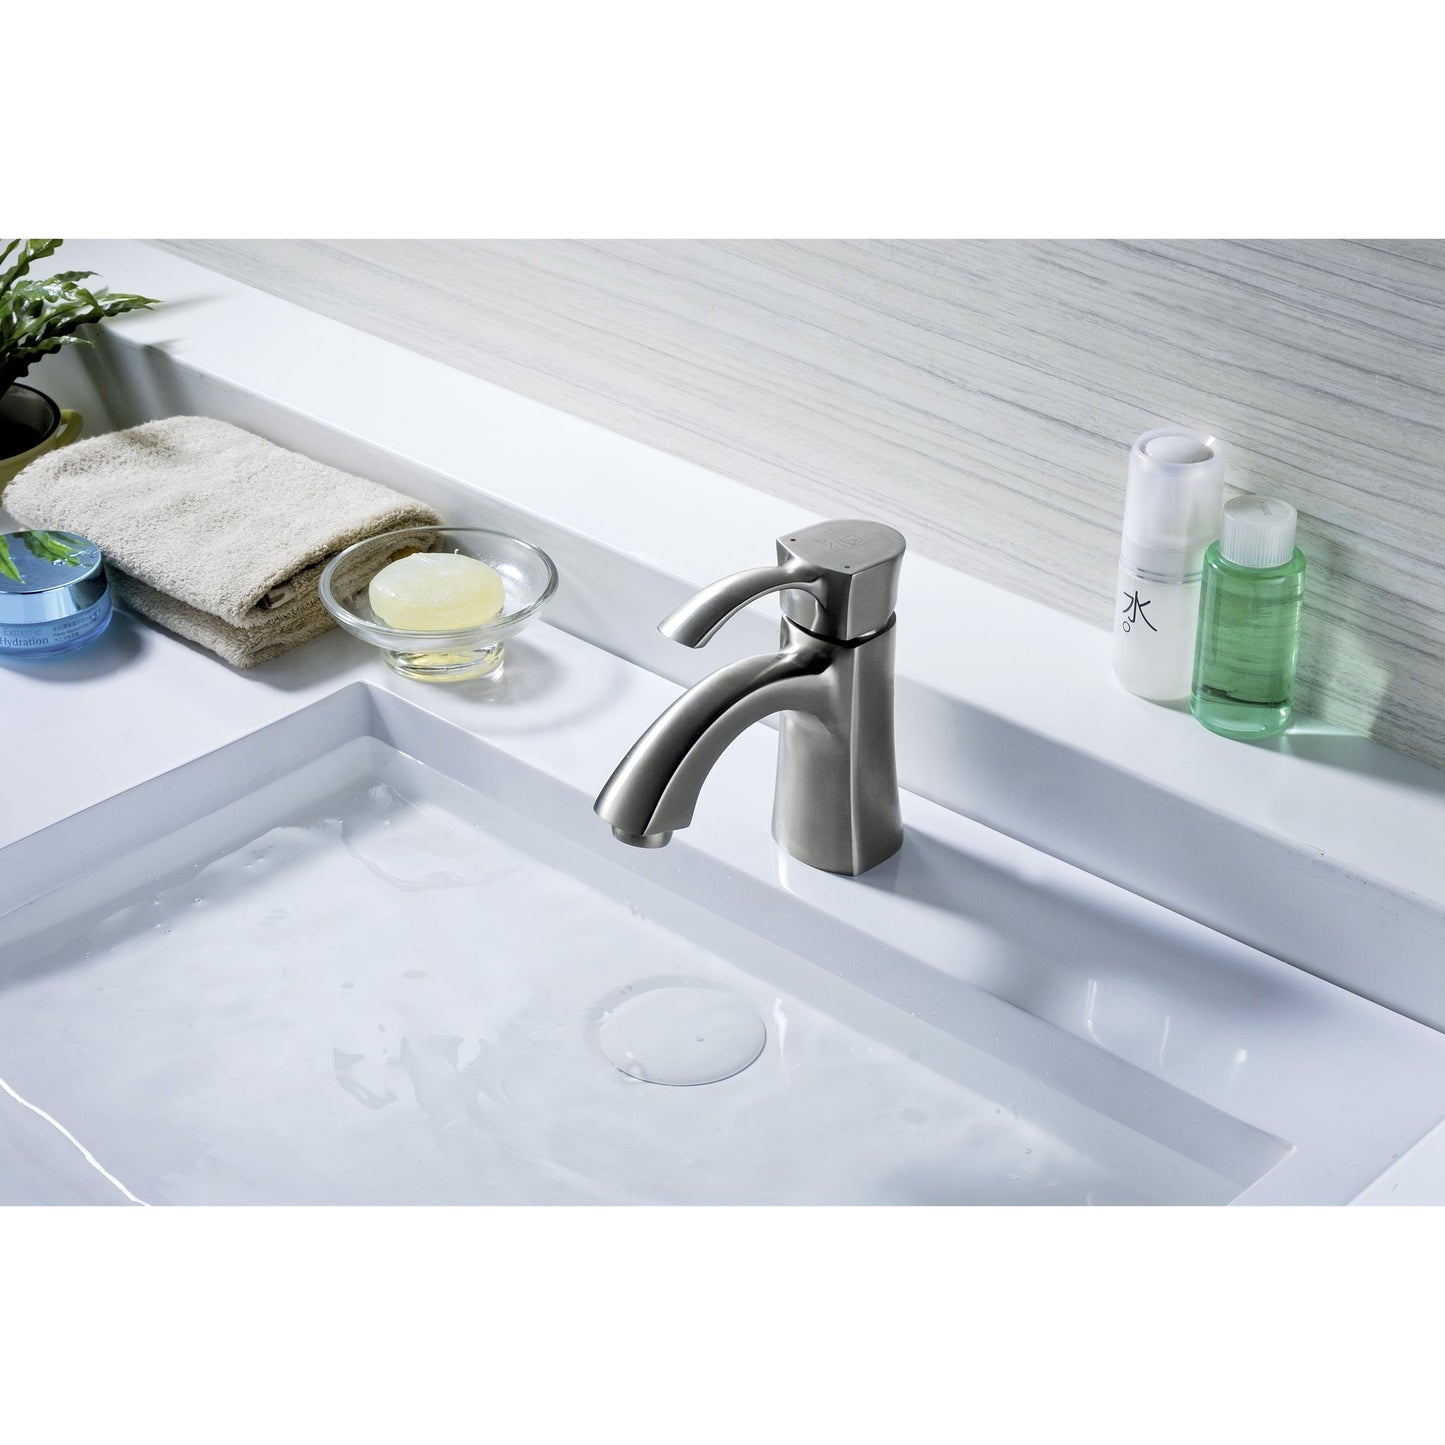 ANZZI Alto Series 3" Single Hole Brushed Nickel Mid-Arc Bathroom Sink Faucet